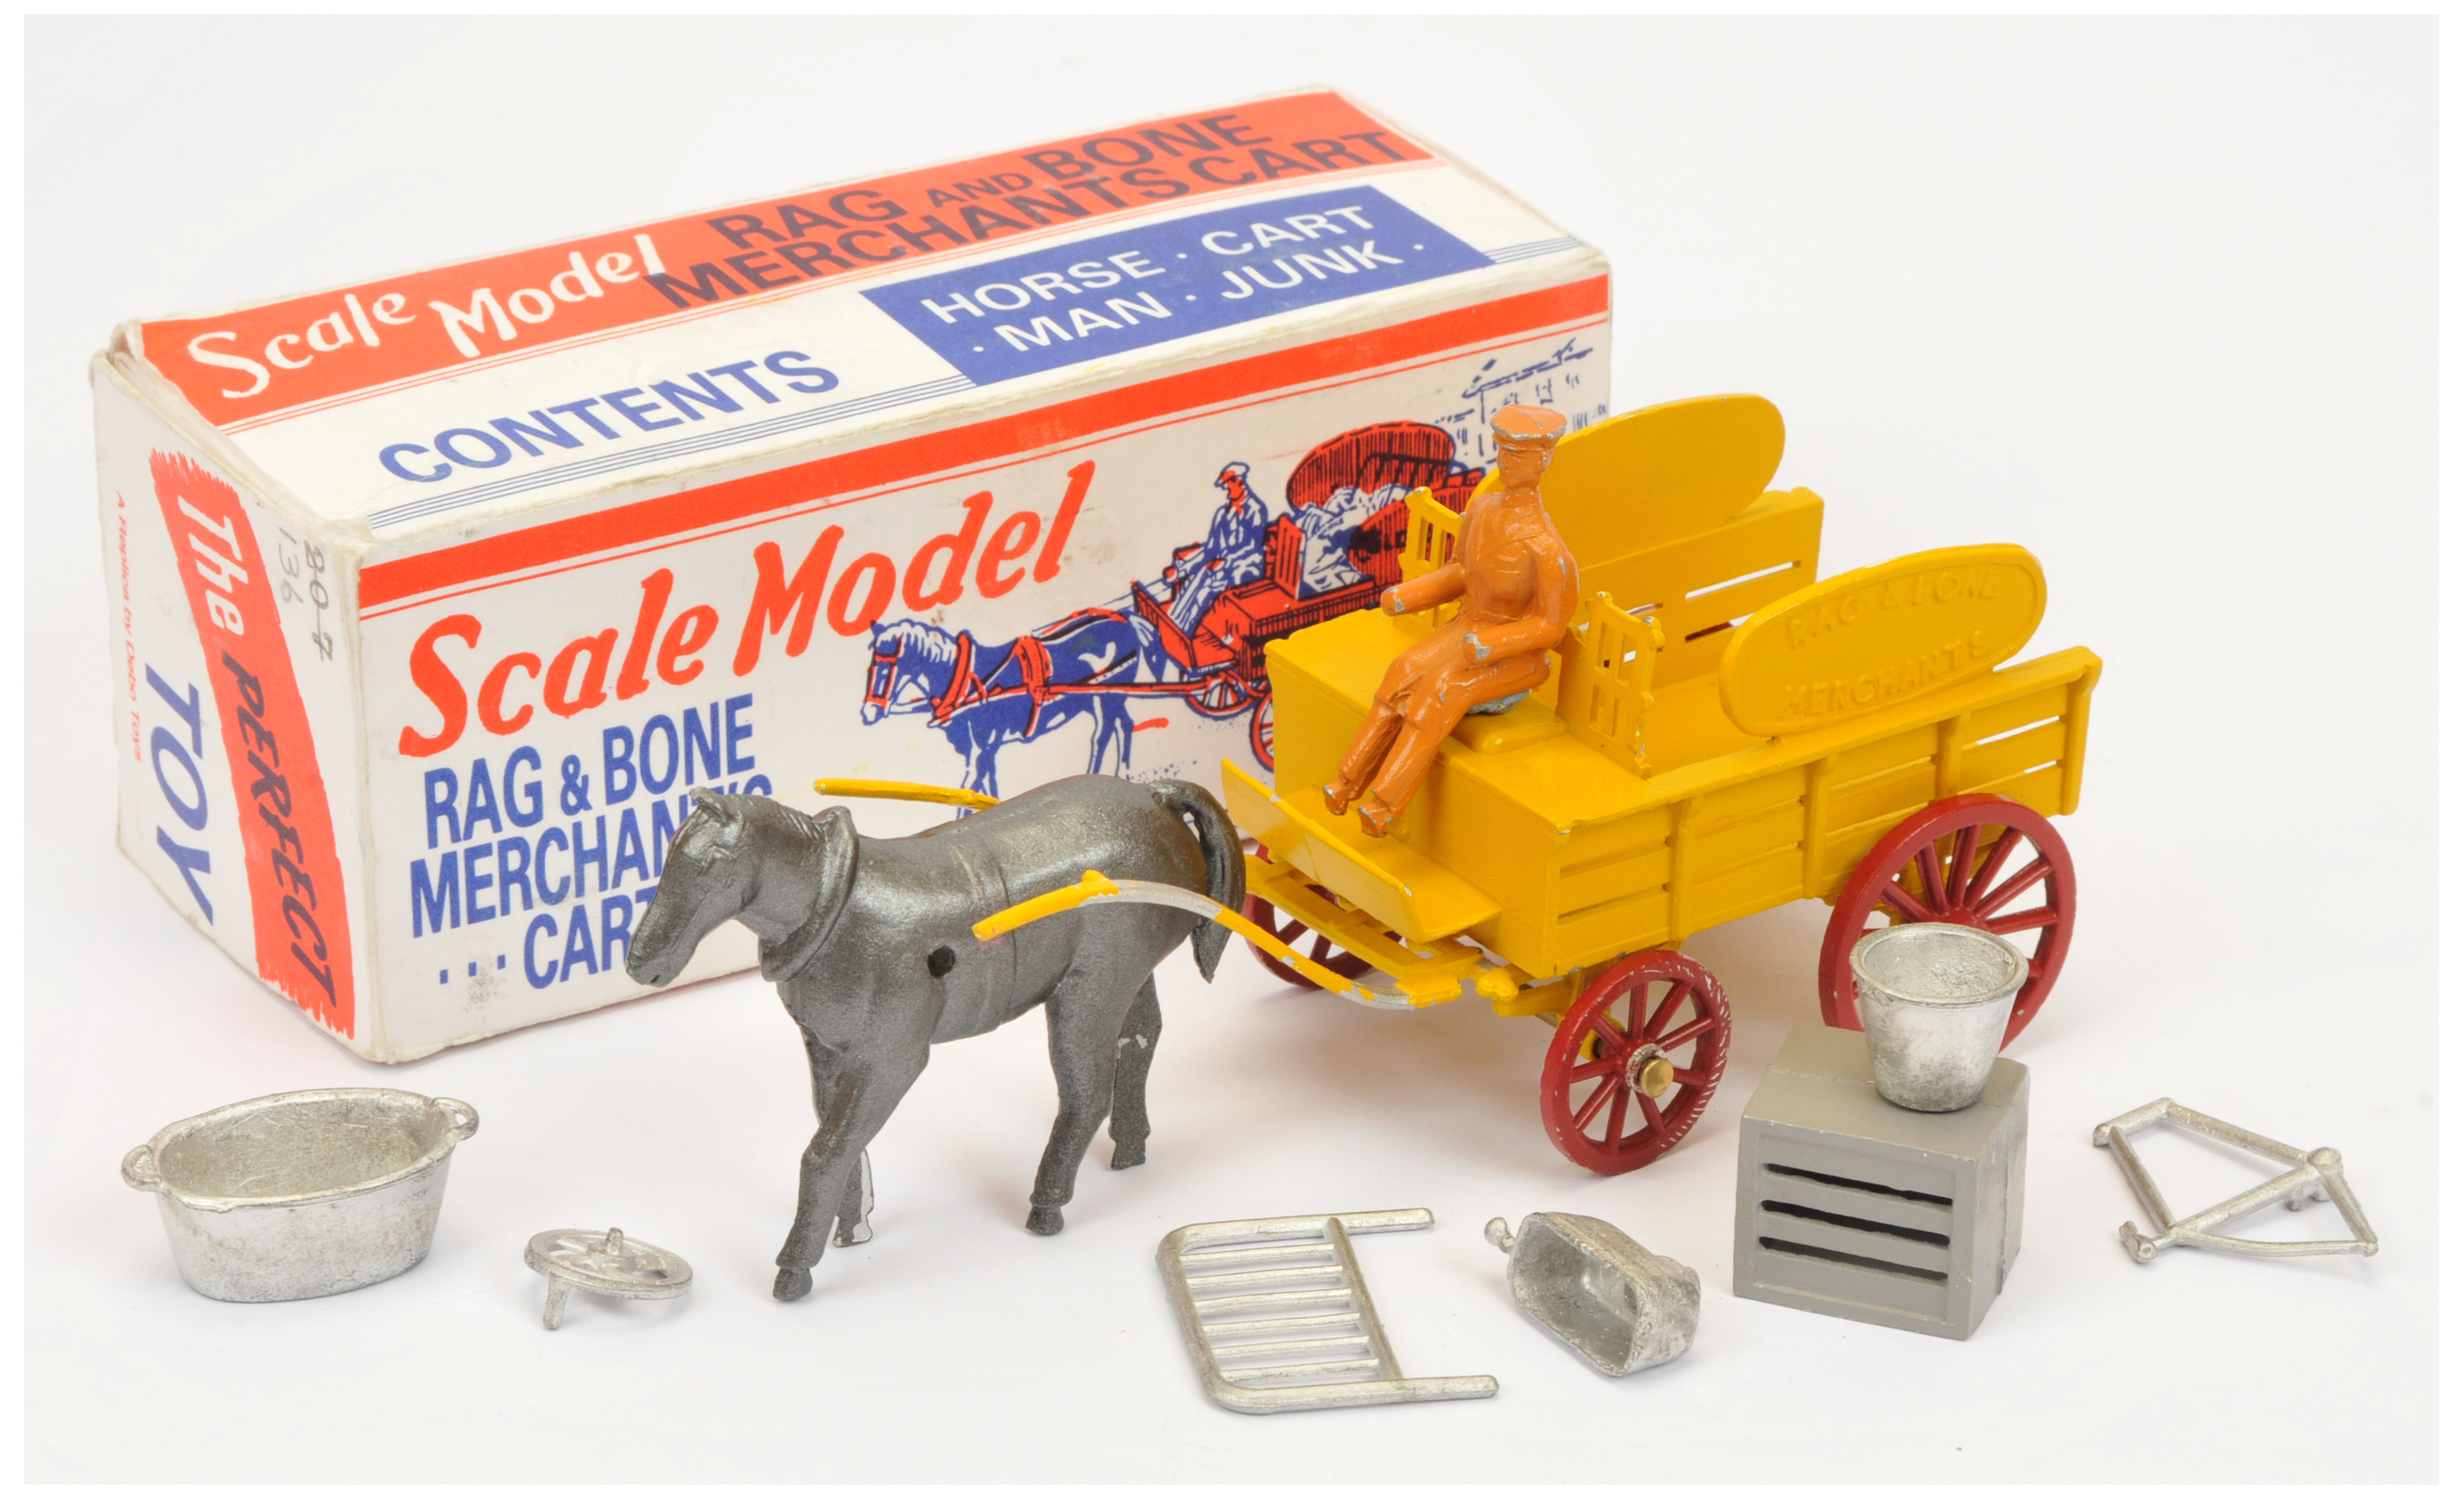 Matchbox Models of Yesteryear "The Perfect Toy" MICA re-issue Rag & Bone Merchants Cart - yellow ...